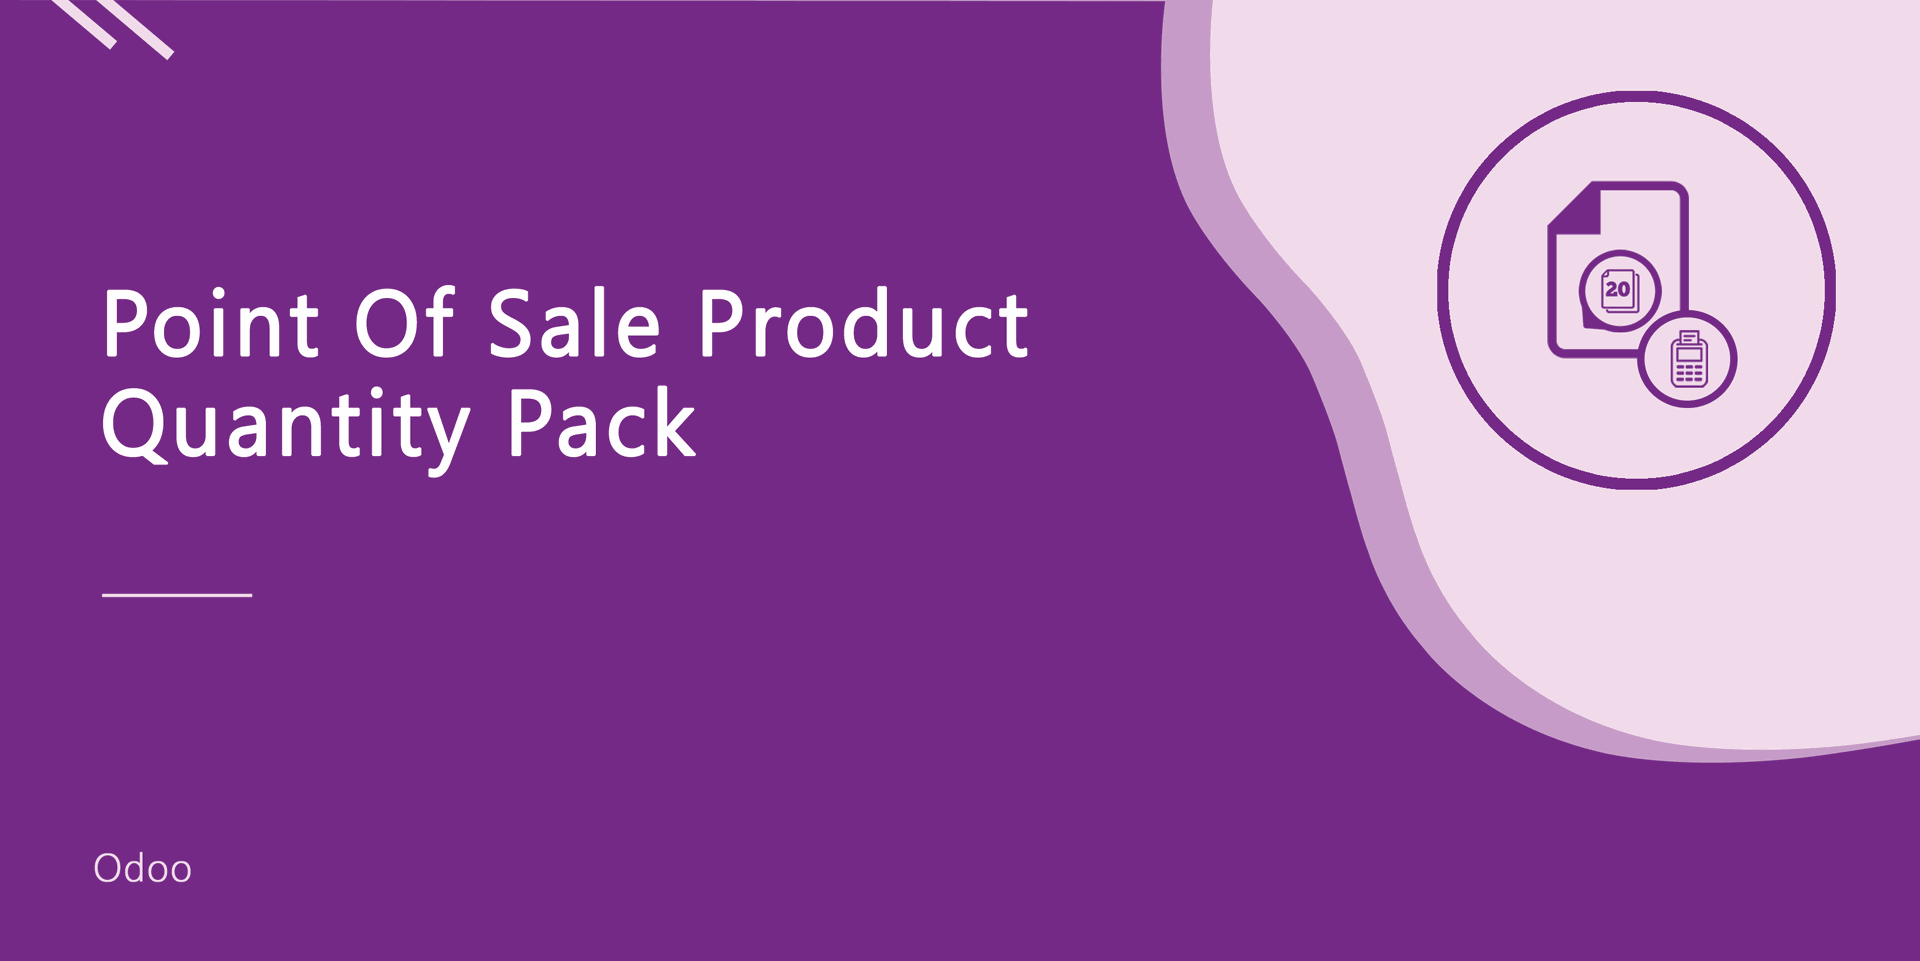 Point Of Sale Product Quantity Pack